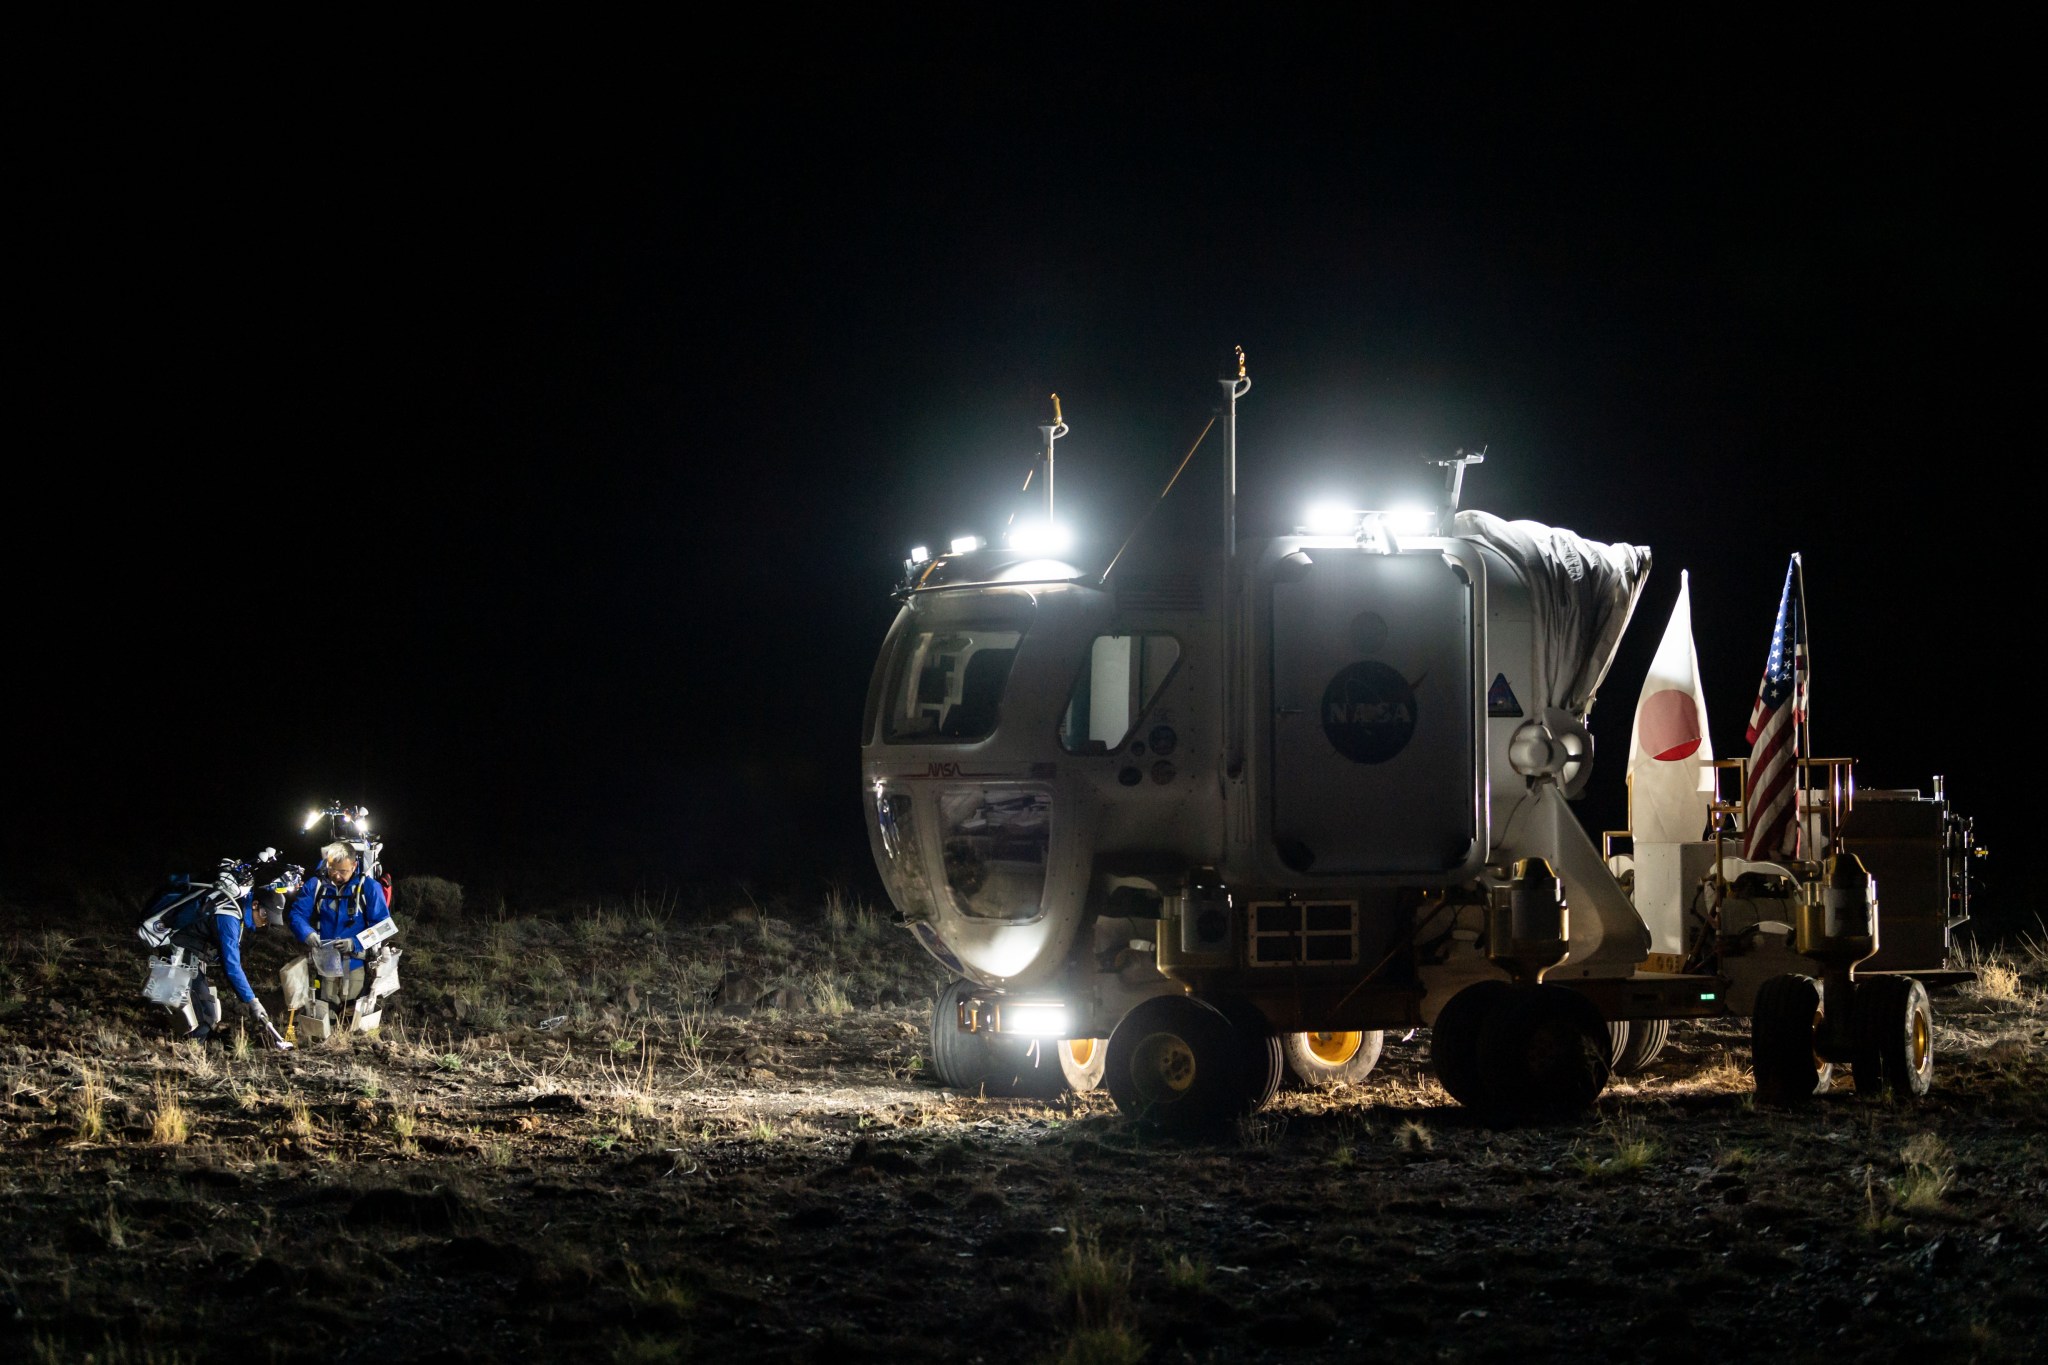 D-RATS JAXA crew members Akihiro Hoshide and Yusuke Yamasaki collect samples during a simulated moonwalk using light from the rover and their backpacks.